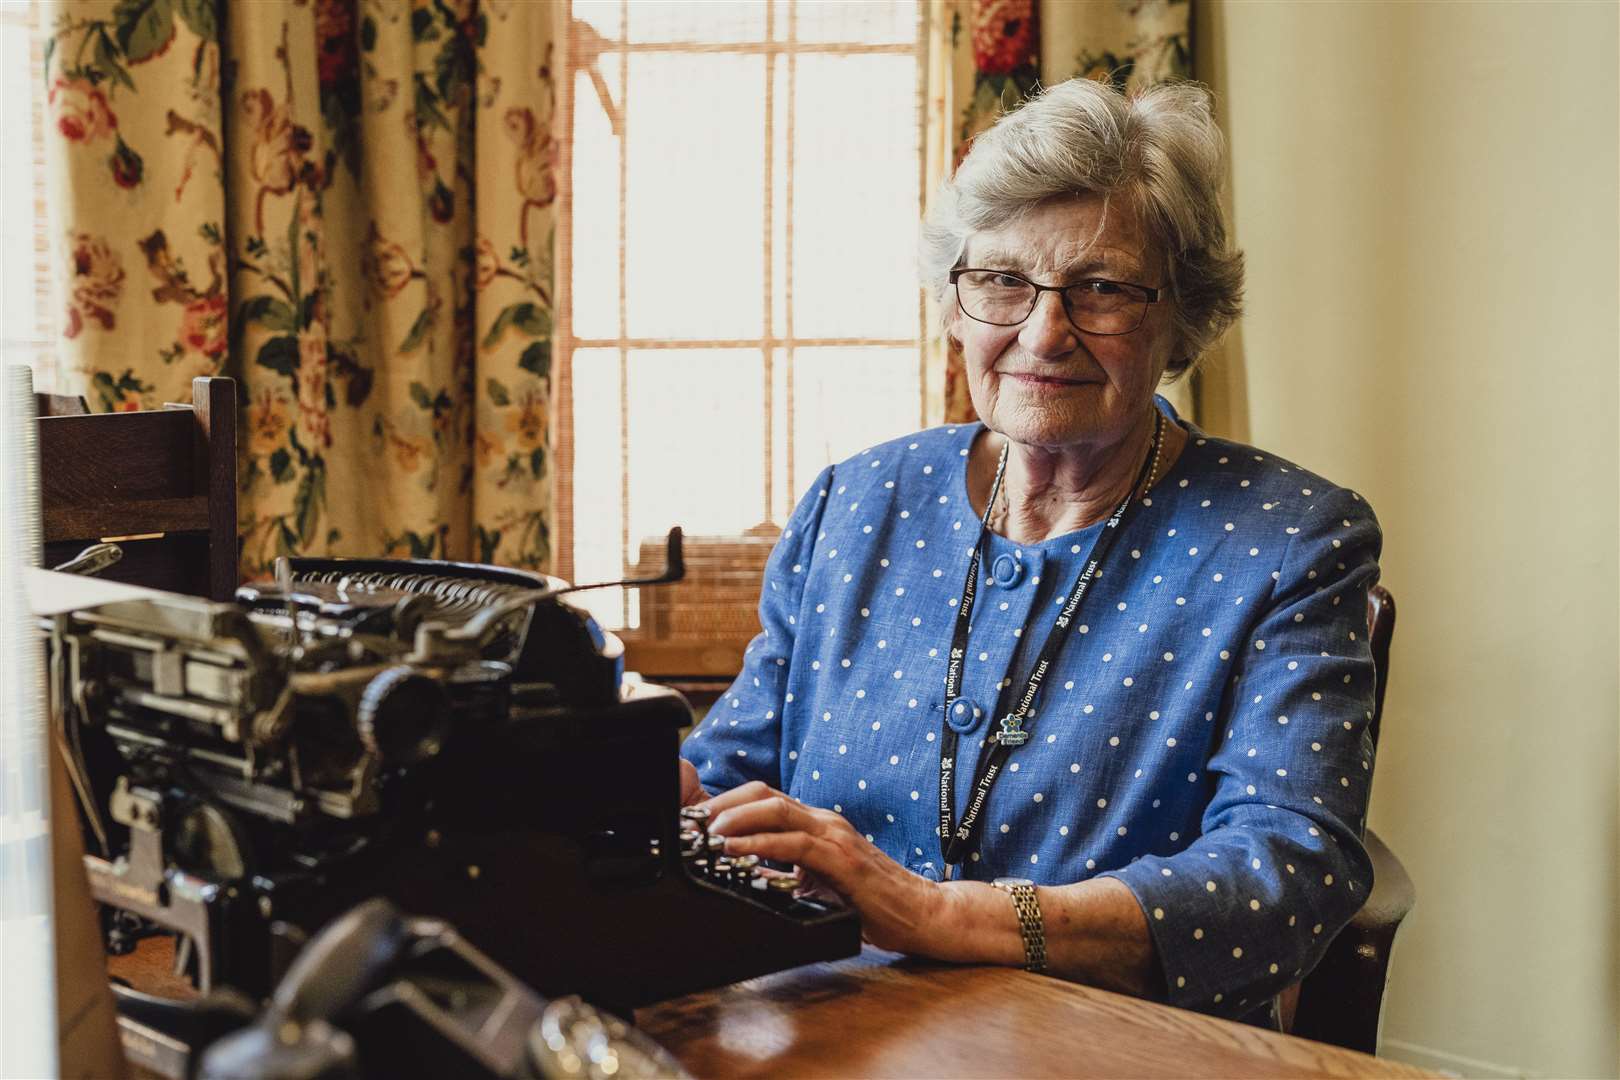 Nonie Chapman, one of Sir Winston Churchill’s former secretaries in the newly recreated secretaries’ office at Chartwell Picture: National Trust Images/Kate York